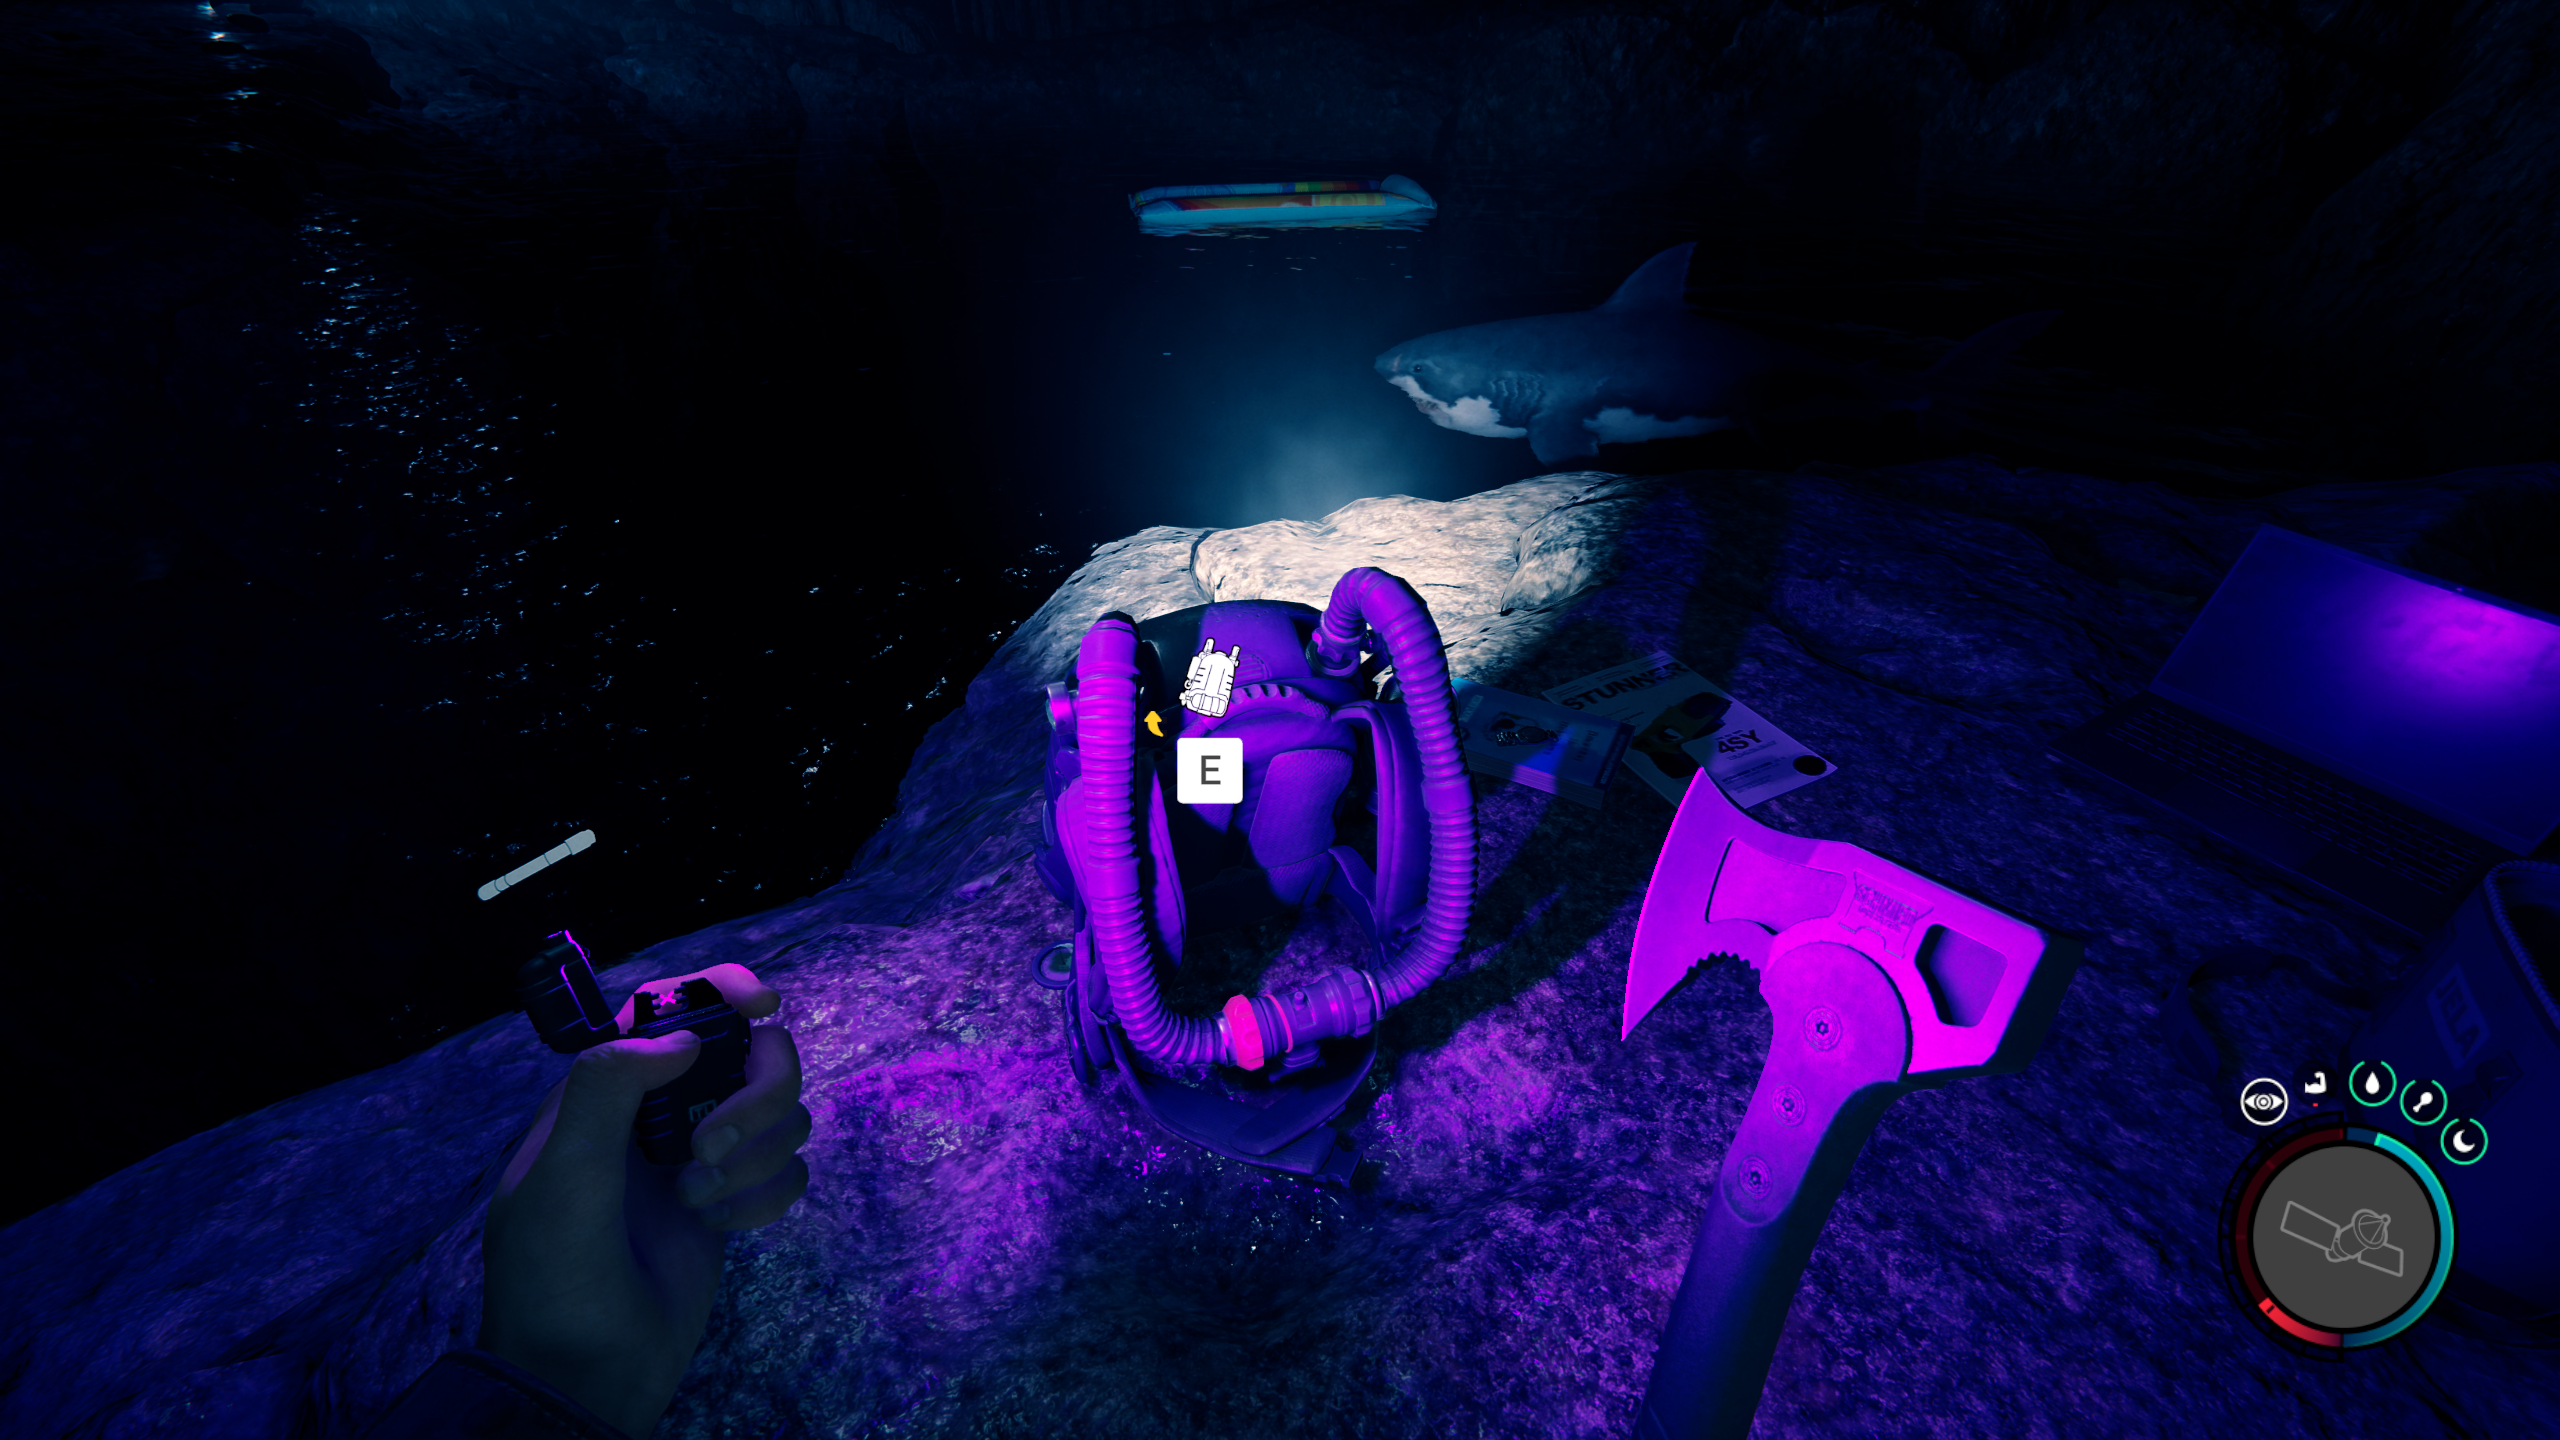 Sons of the Forest - a player holding an axe and lighter looks at a rebreather on the ground in a cave